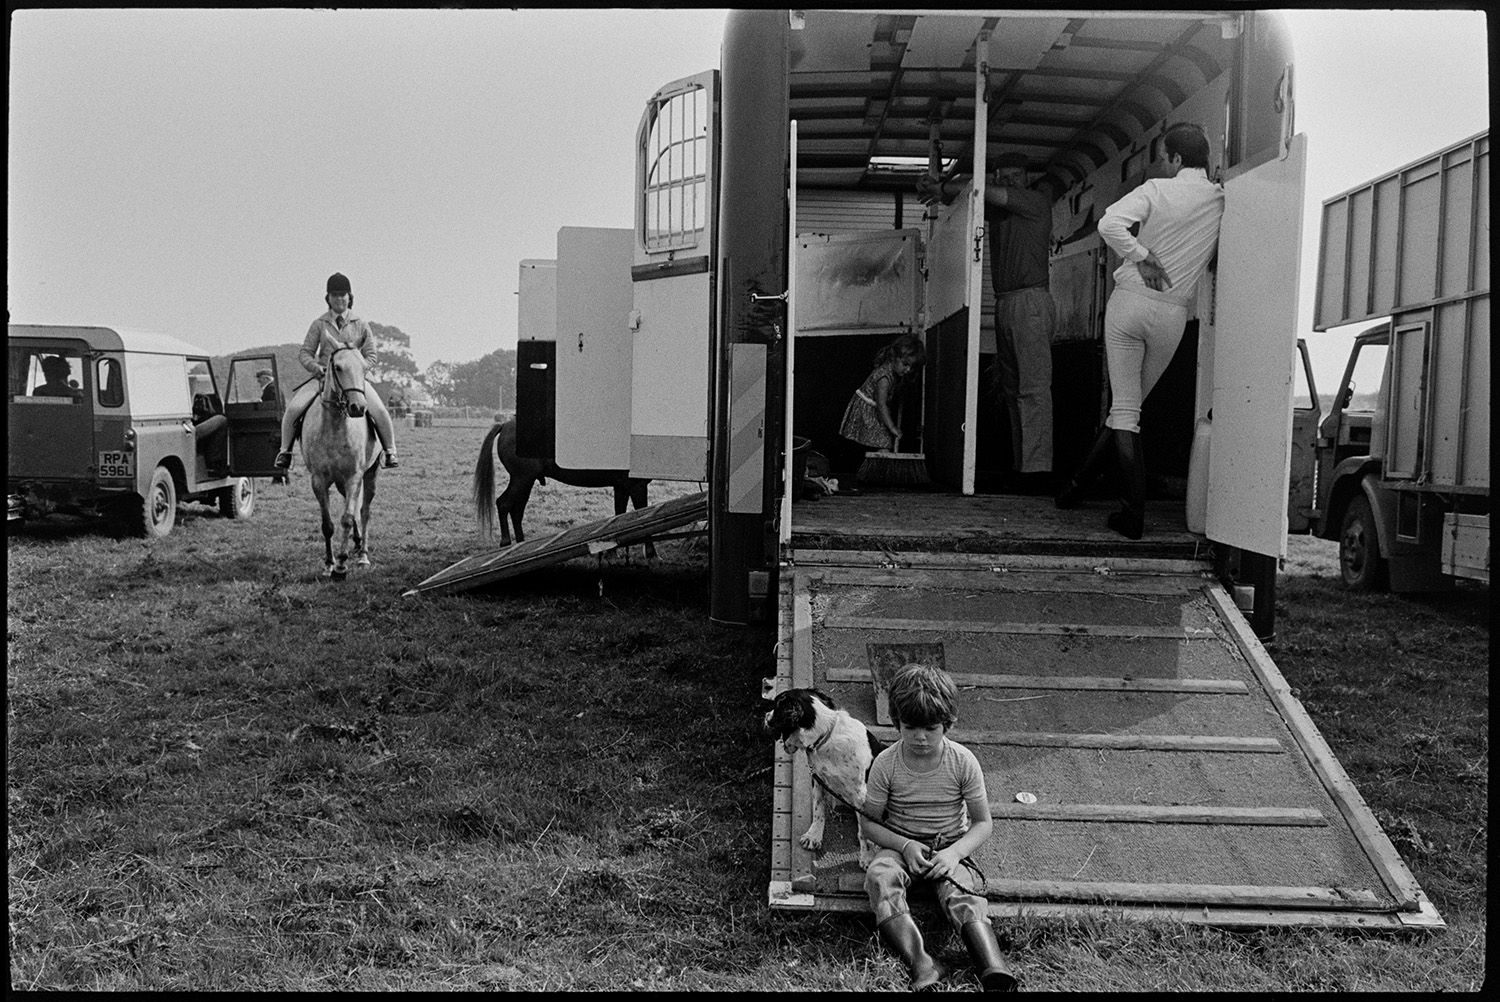 Competitors preparing gymkhana, horseboxes. 
[A young child and a dog sitting on the ramp leading up into a horsebox at Beaford Gymkhana. A  competitor is riding towards them on horseback.]